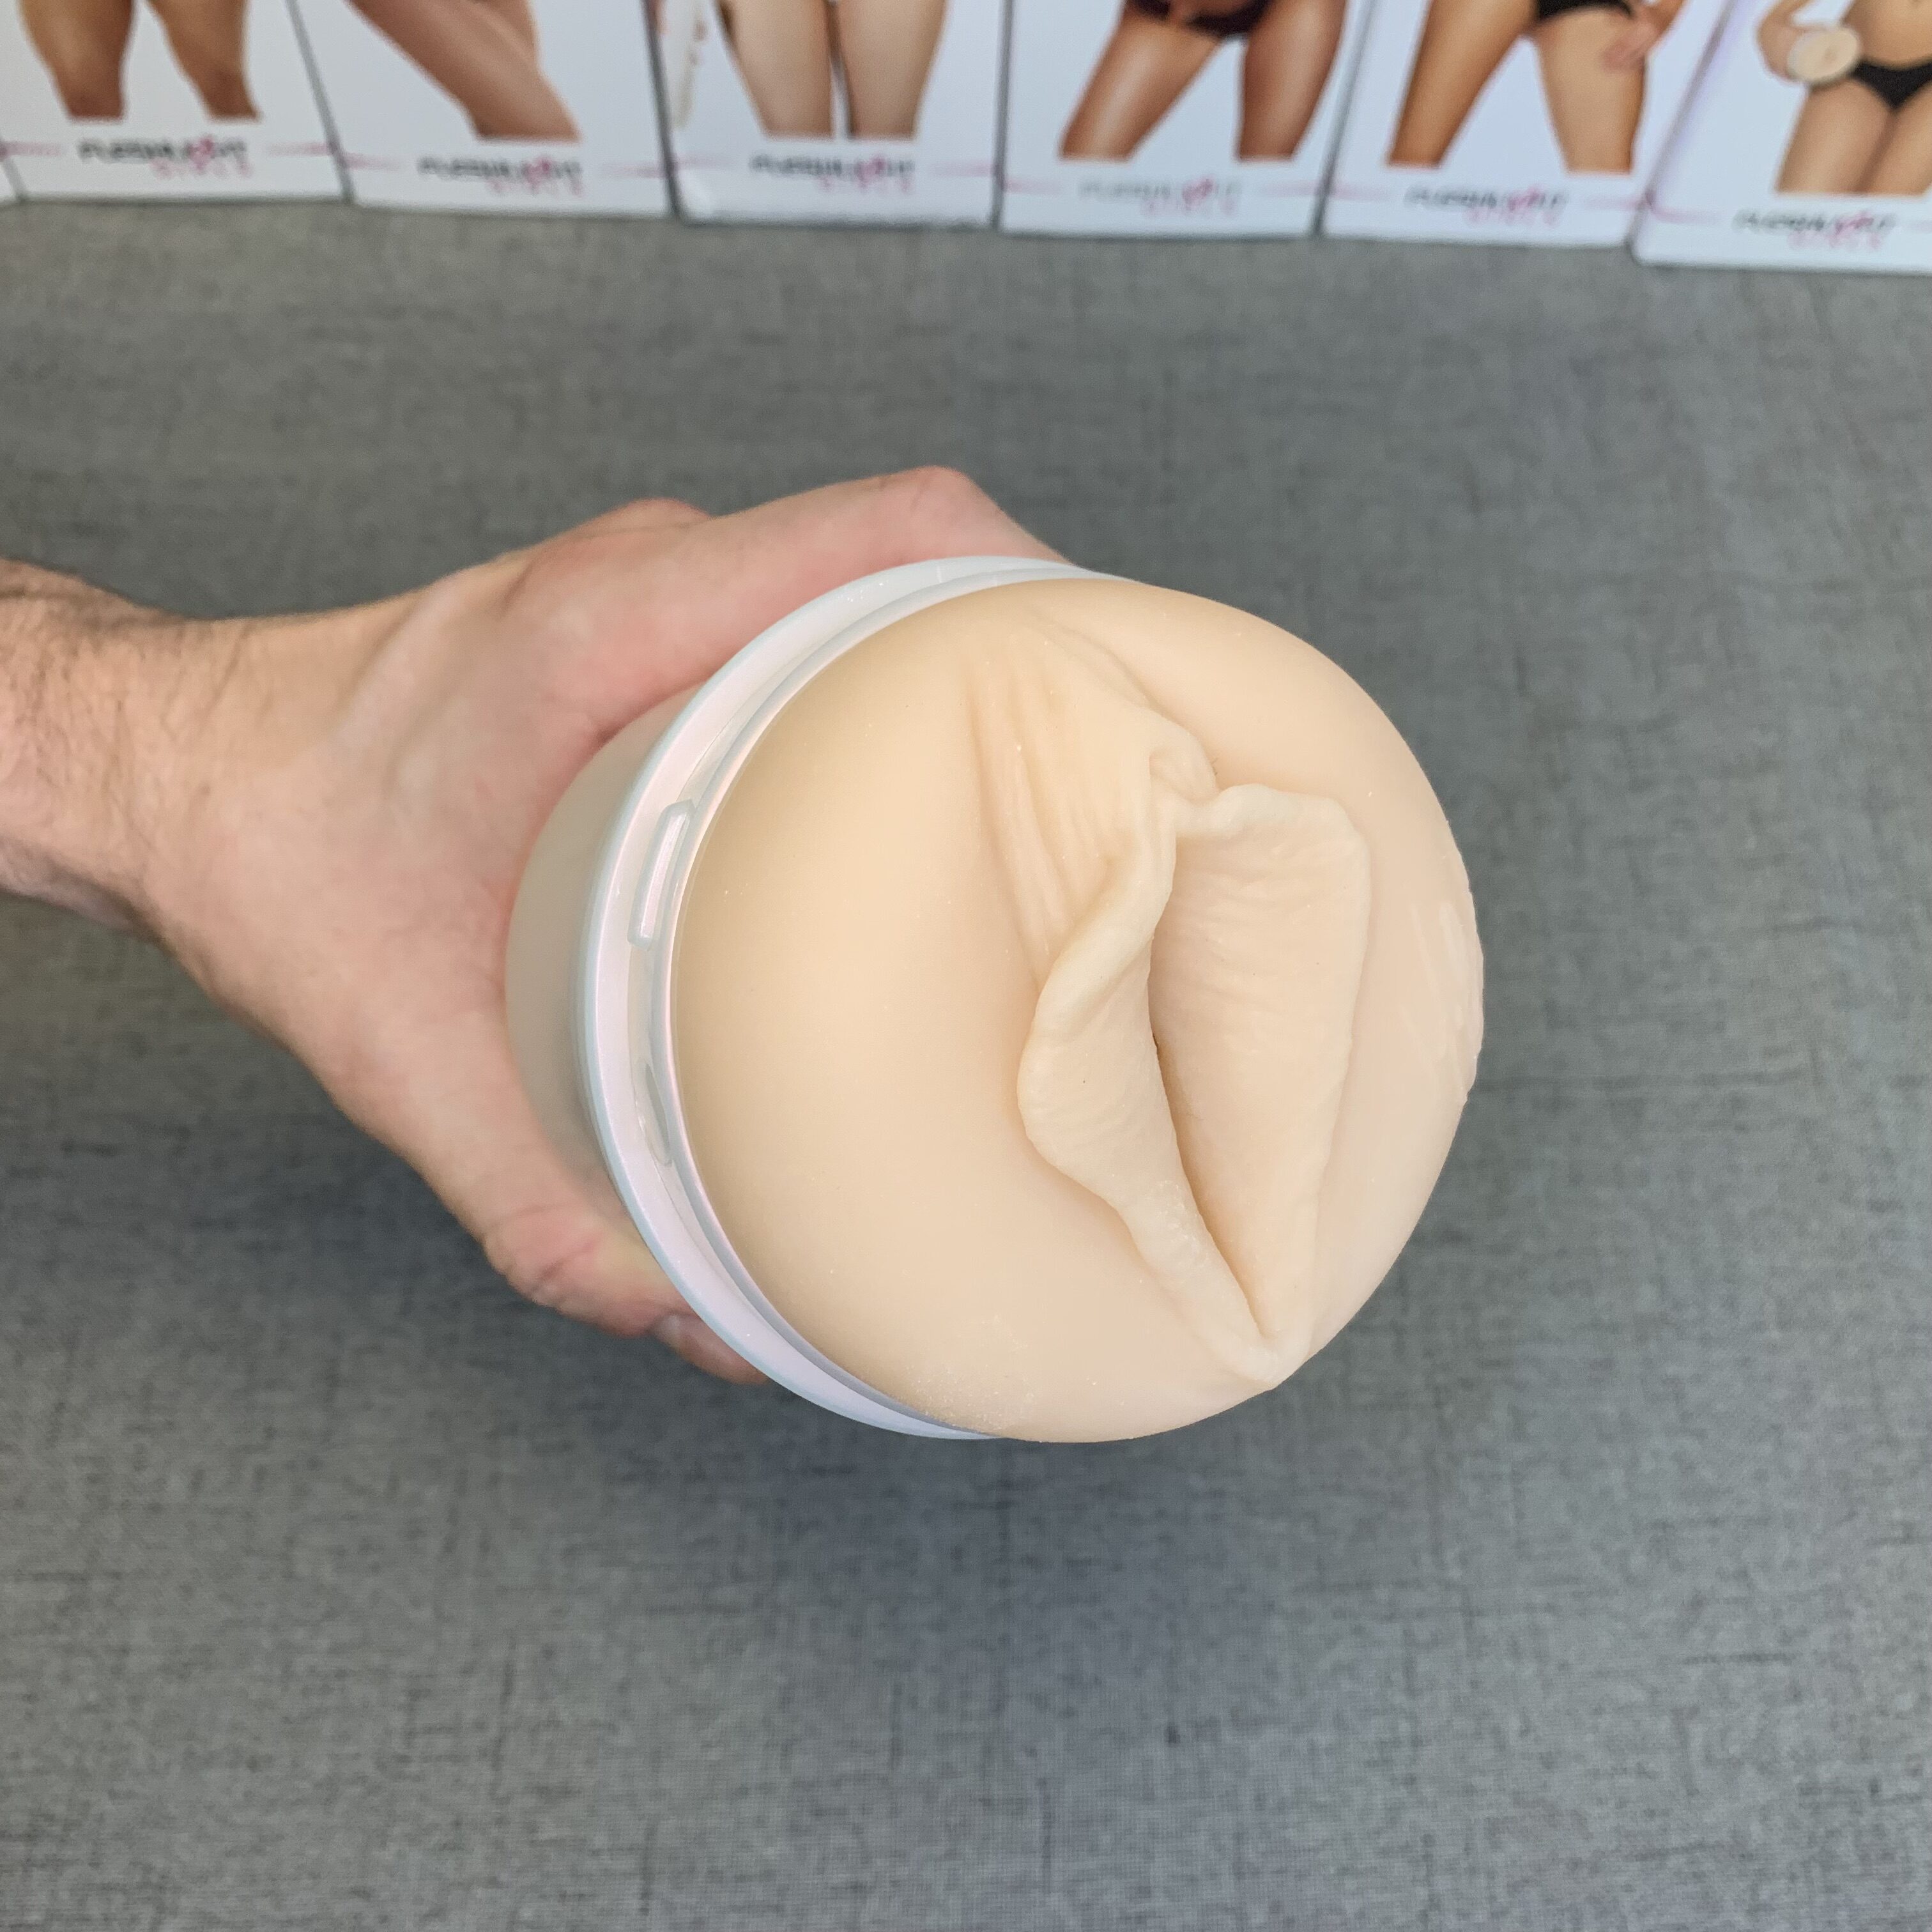 cloude striffe recommends how to tighten fleshlight pic